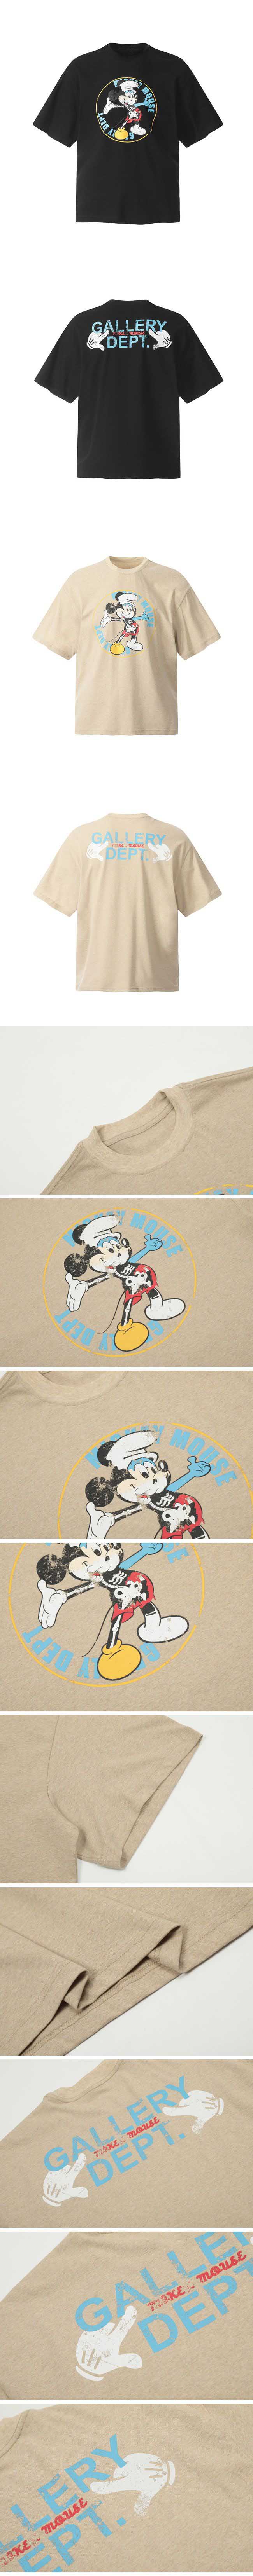 Gallery Dept. Mickey Mouse Print Tee ギャラリーデプト ミッキーマウス プリント Tシャツ